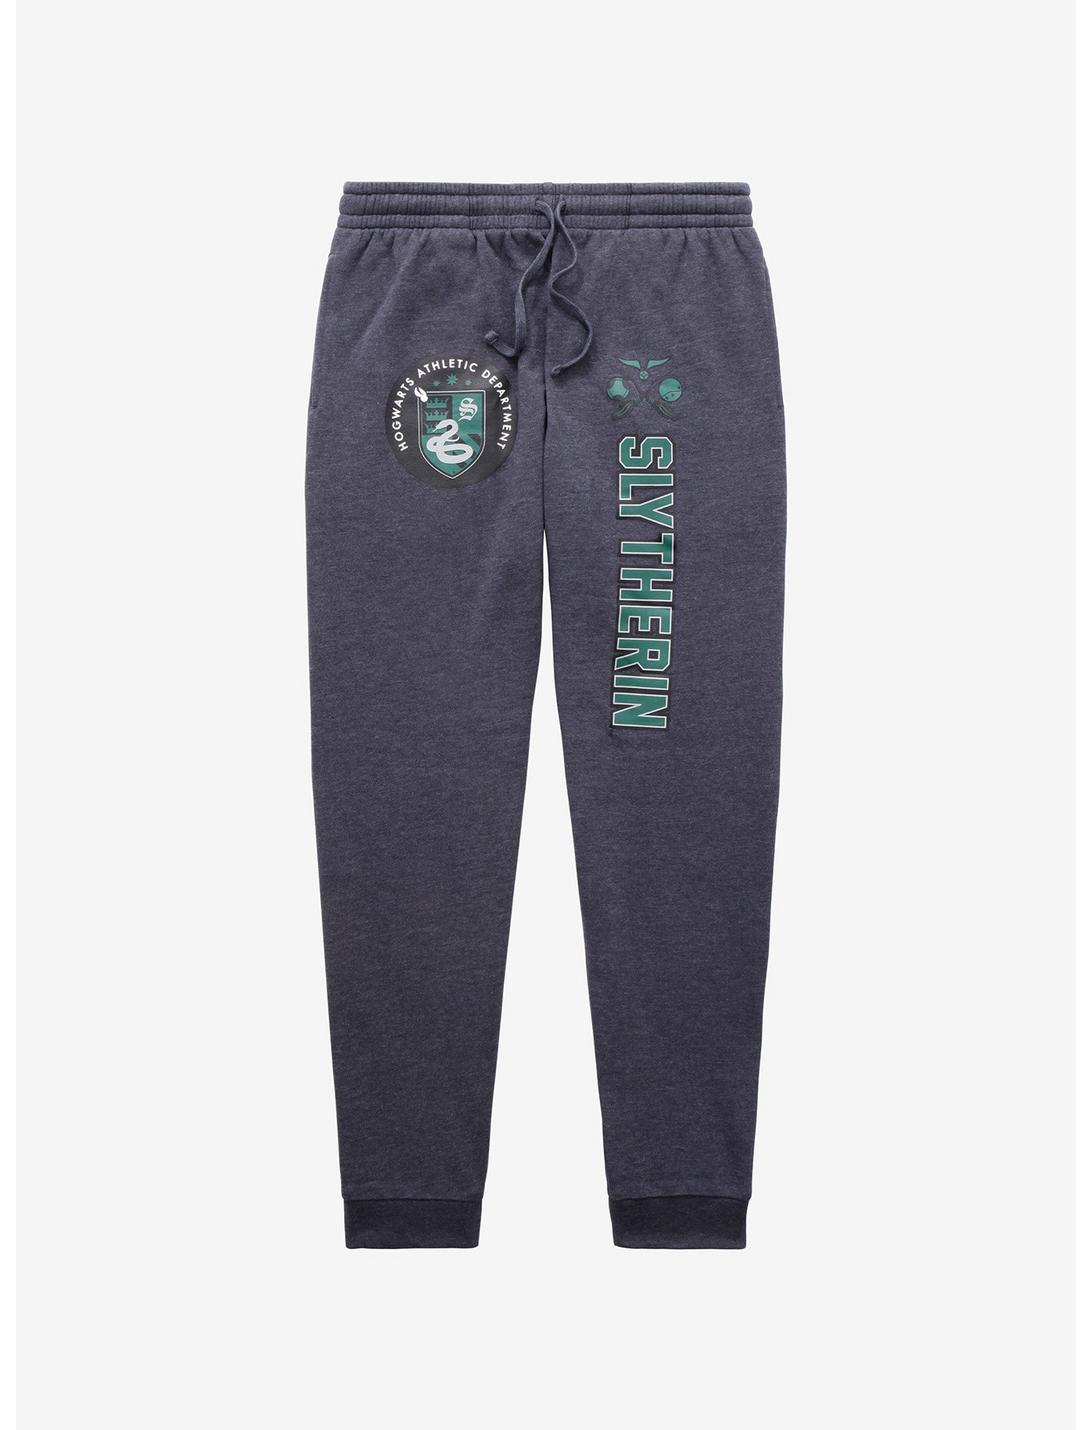 Harry Potter Hogwarts Athletic Department Slytherin Joggers - BoxLunch Exclusive, HEATHER  CHARCOAL, hi-res